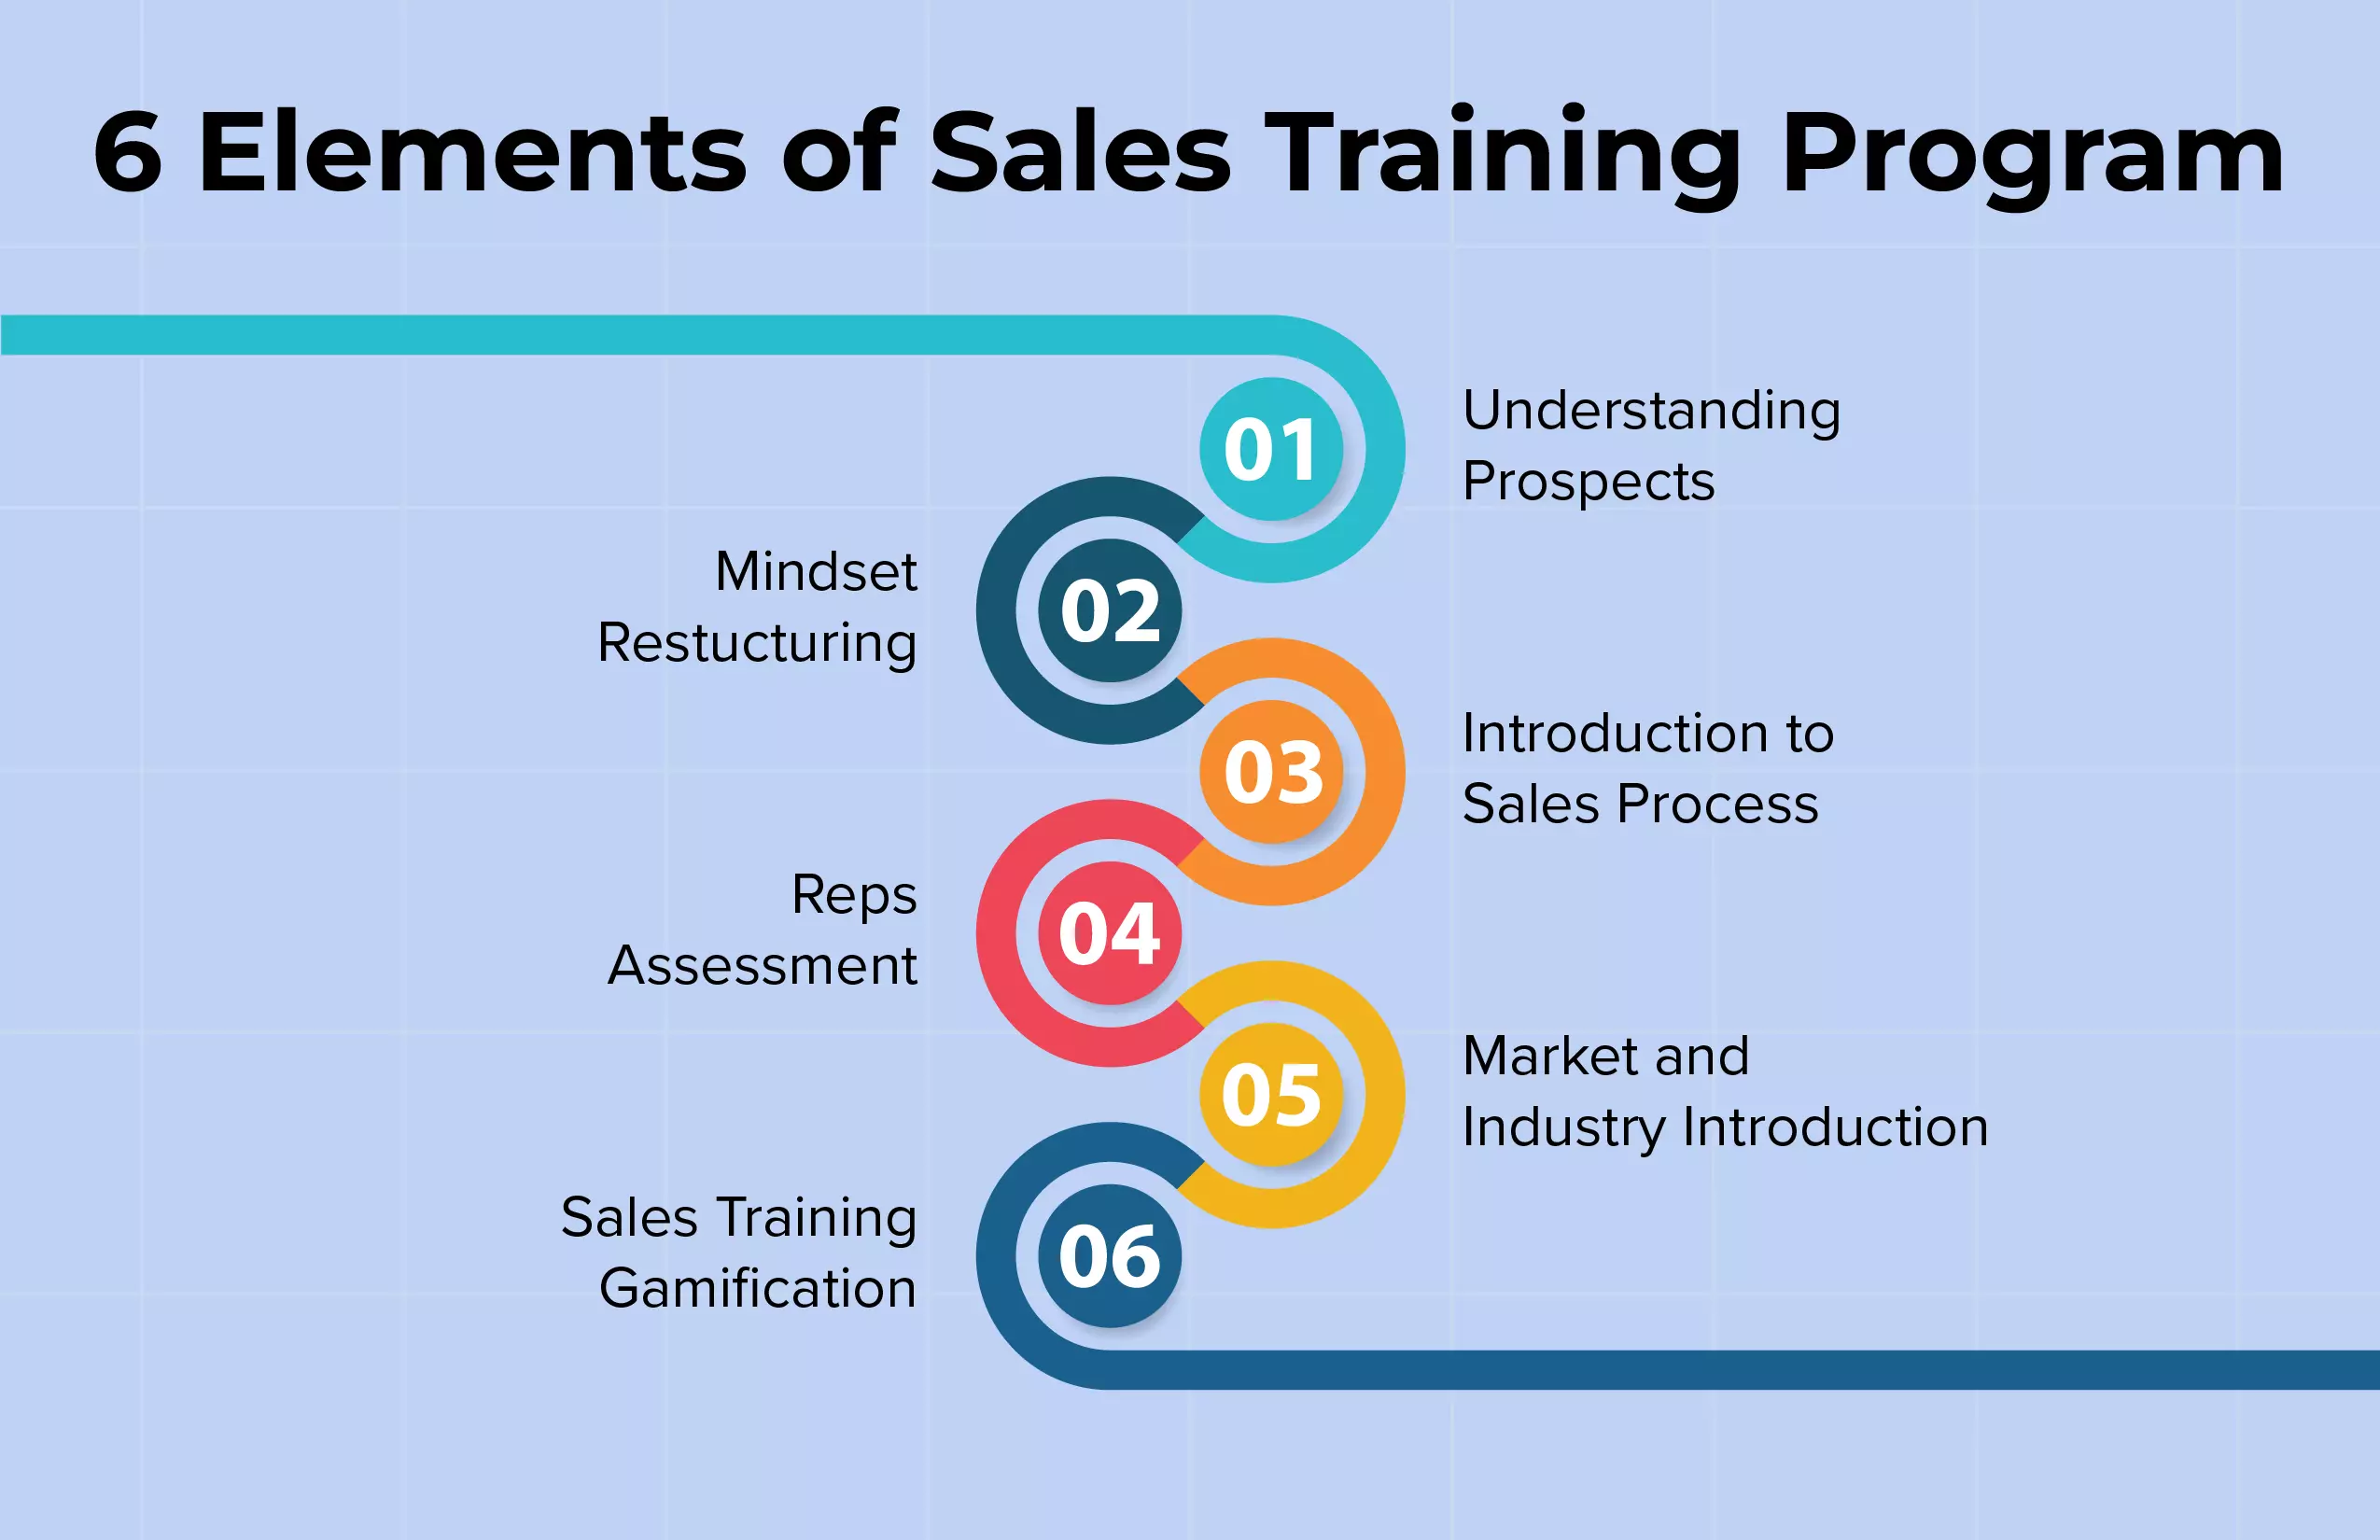 Essential Selling Skills and Training Techniques for Sales Success